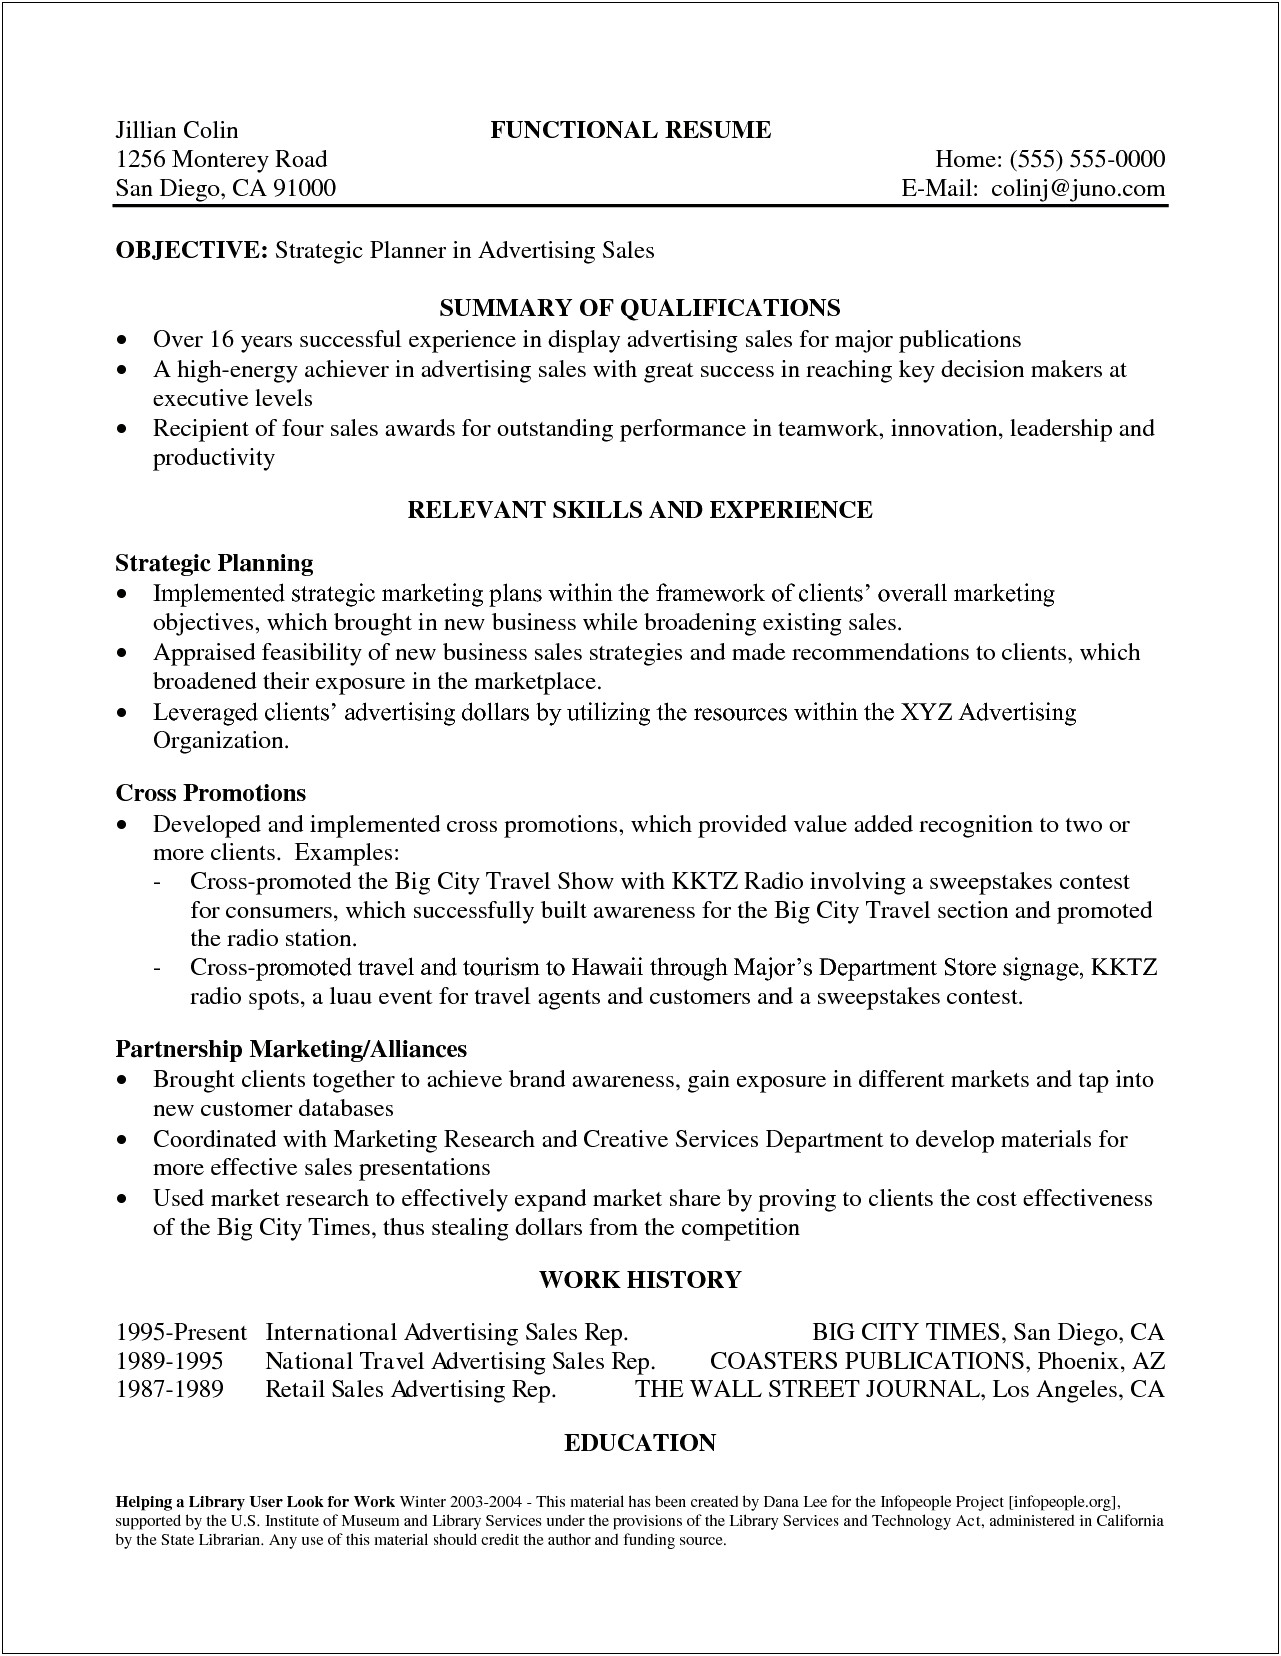 Example Qualifications Summary For Resume